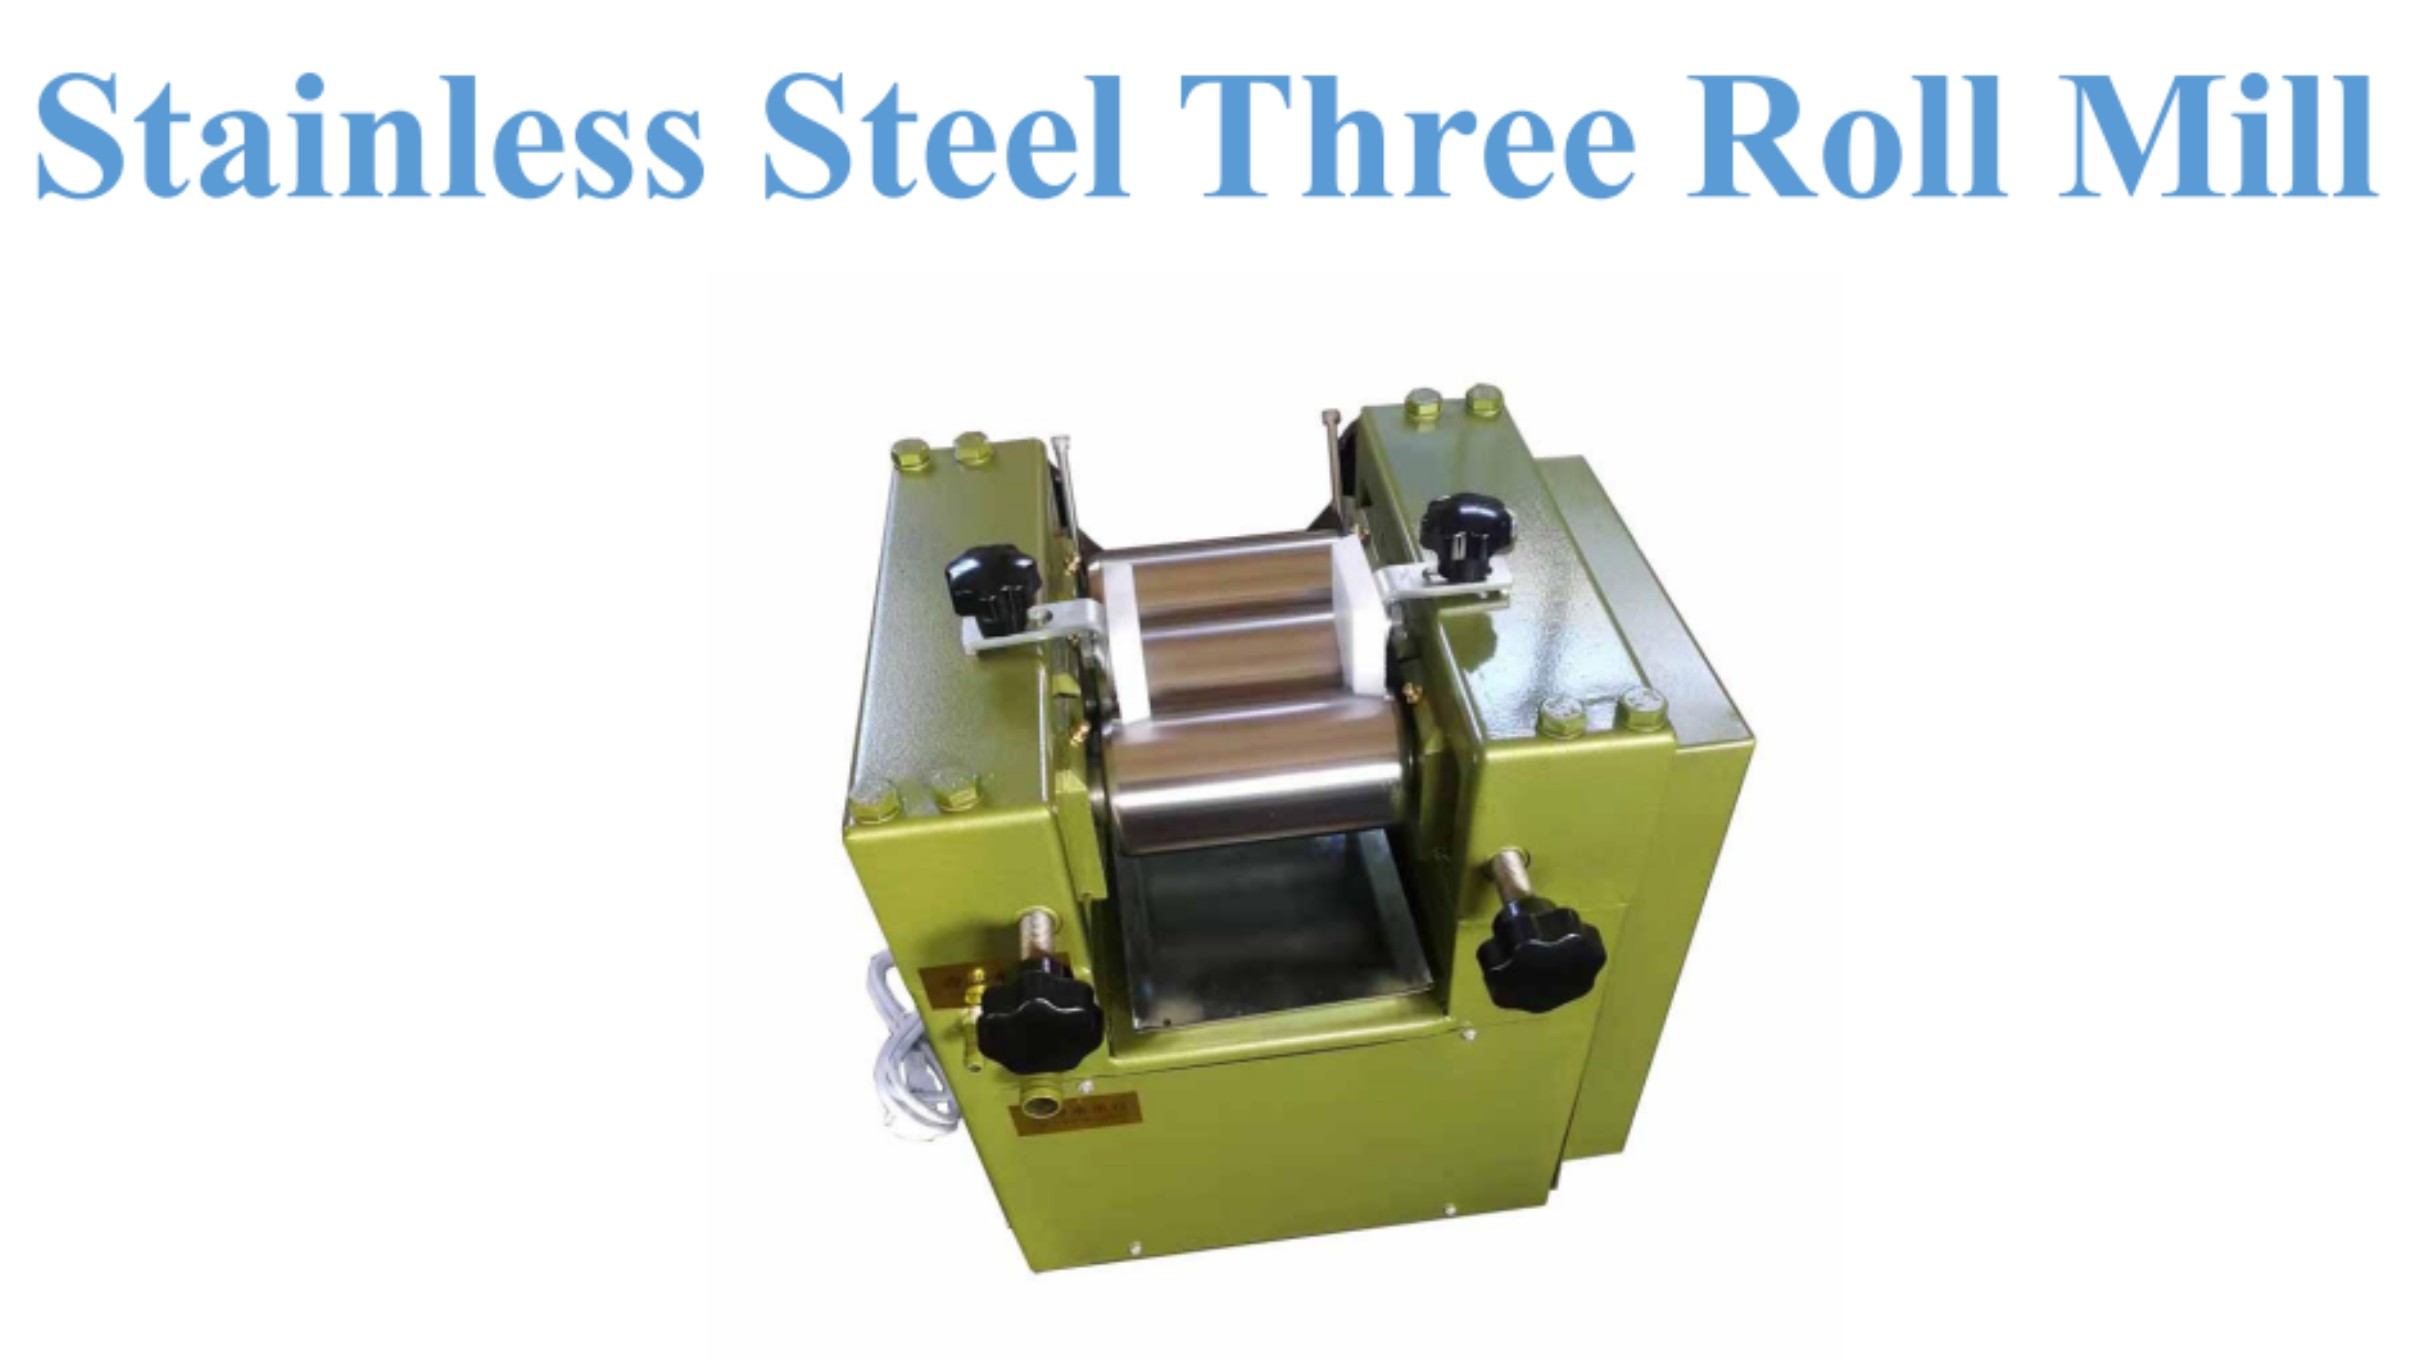 Stainless Steel Three Roll Mill